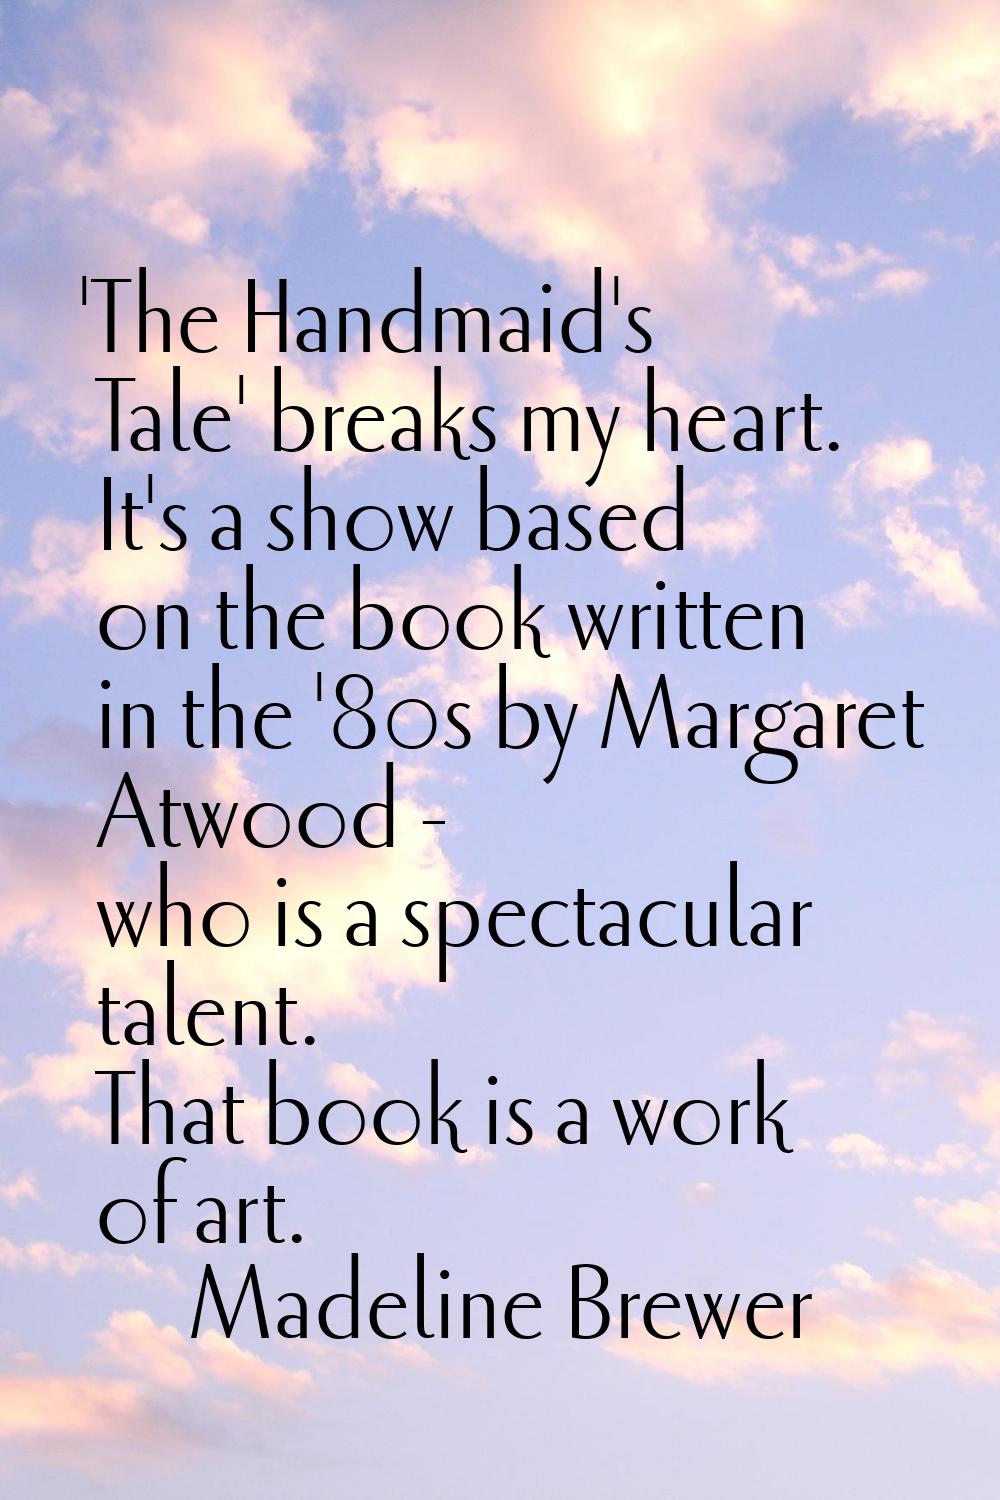 'The Handmaid's Tale' breaks my heart. It's a show based on the book written in the '80s by Margare